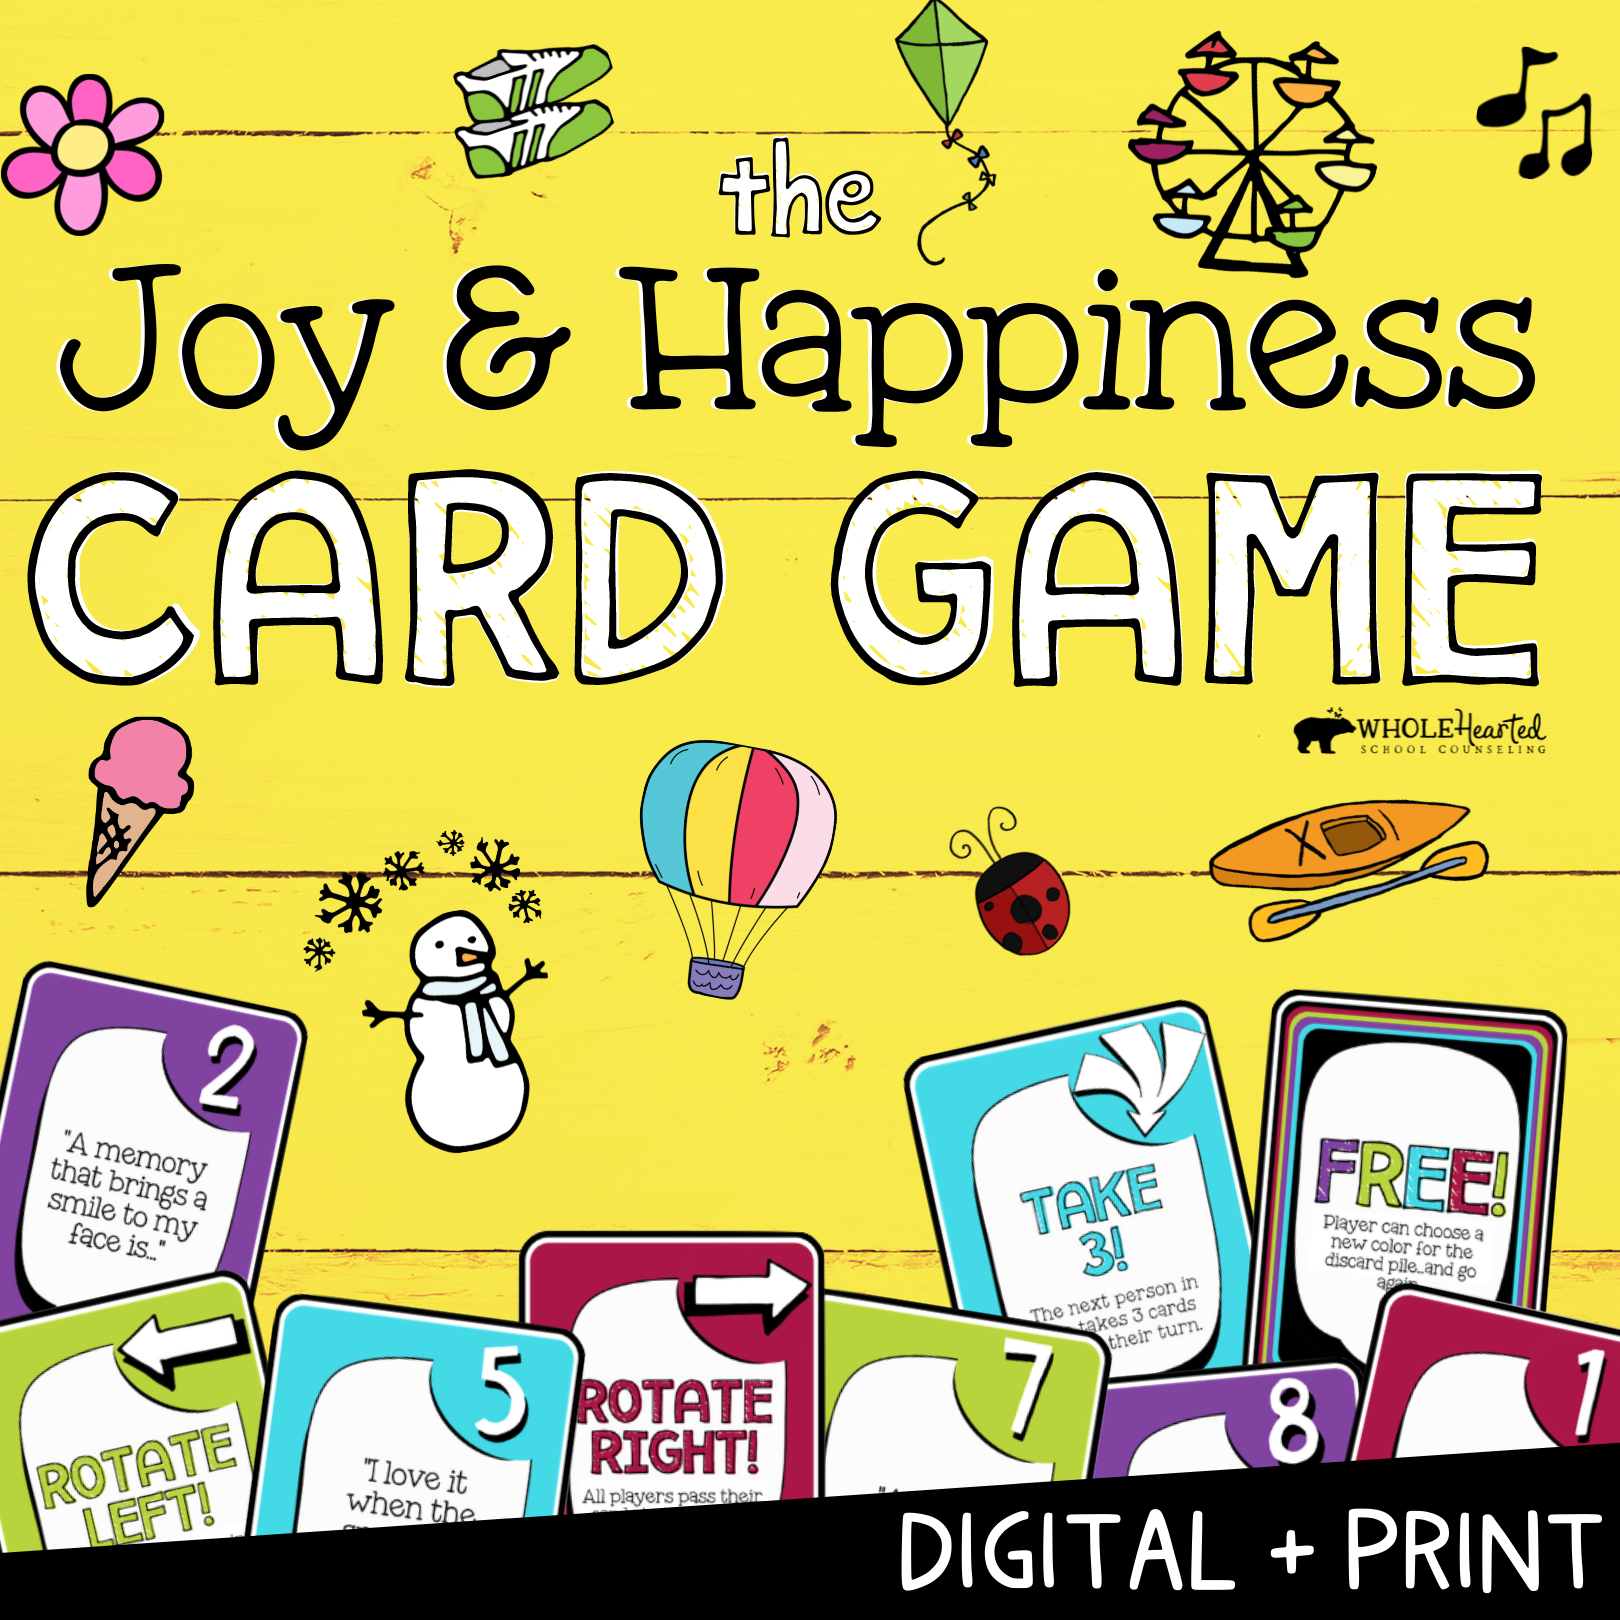 Joy and Happiness Card Game Small Group Counseling